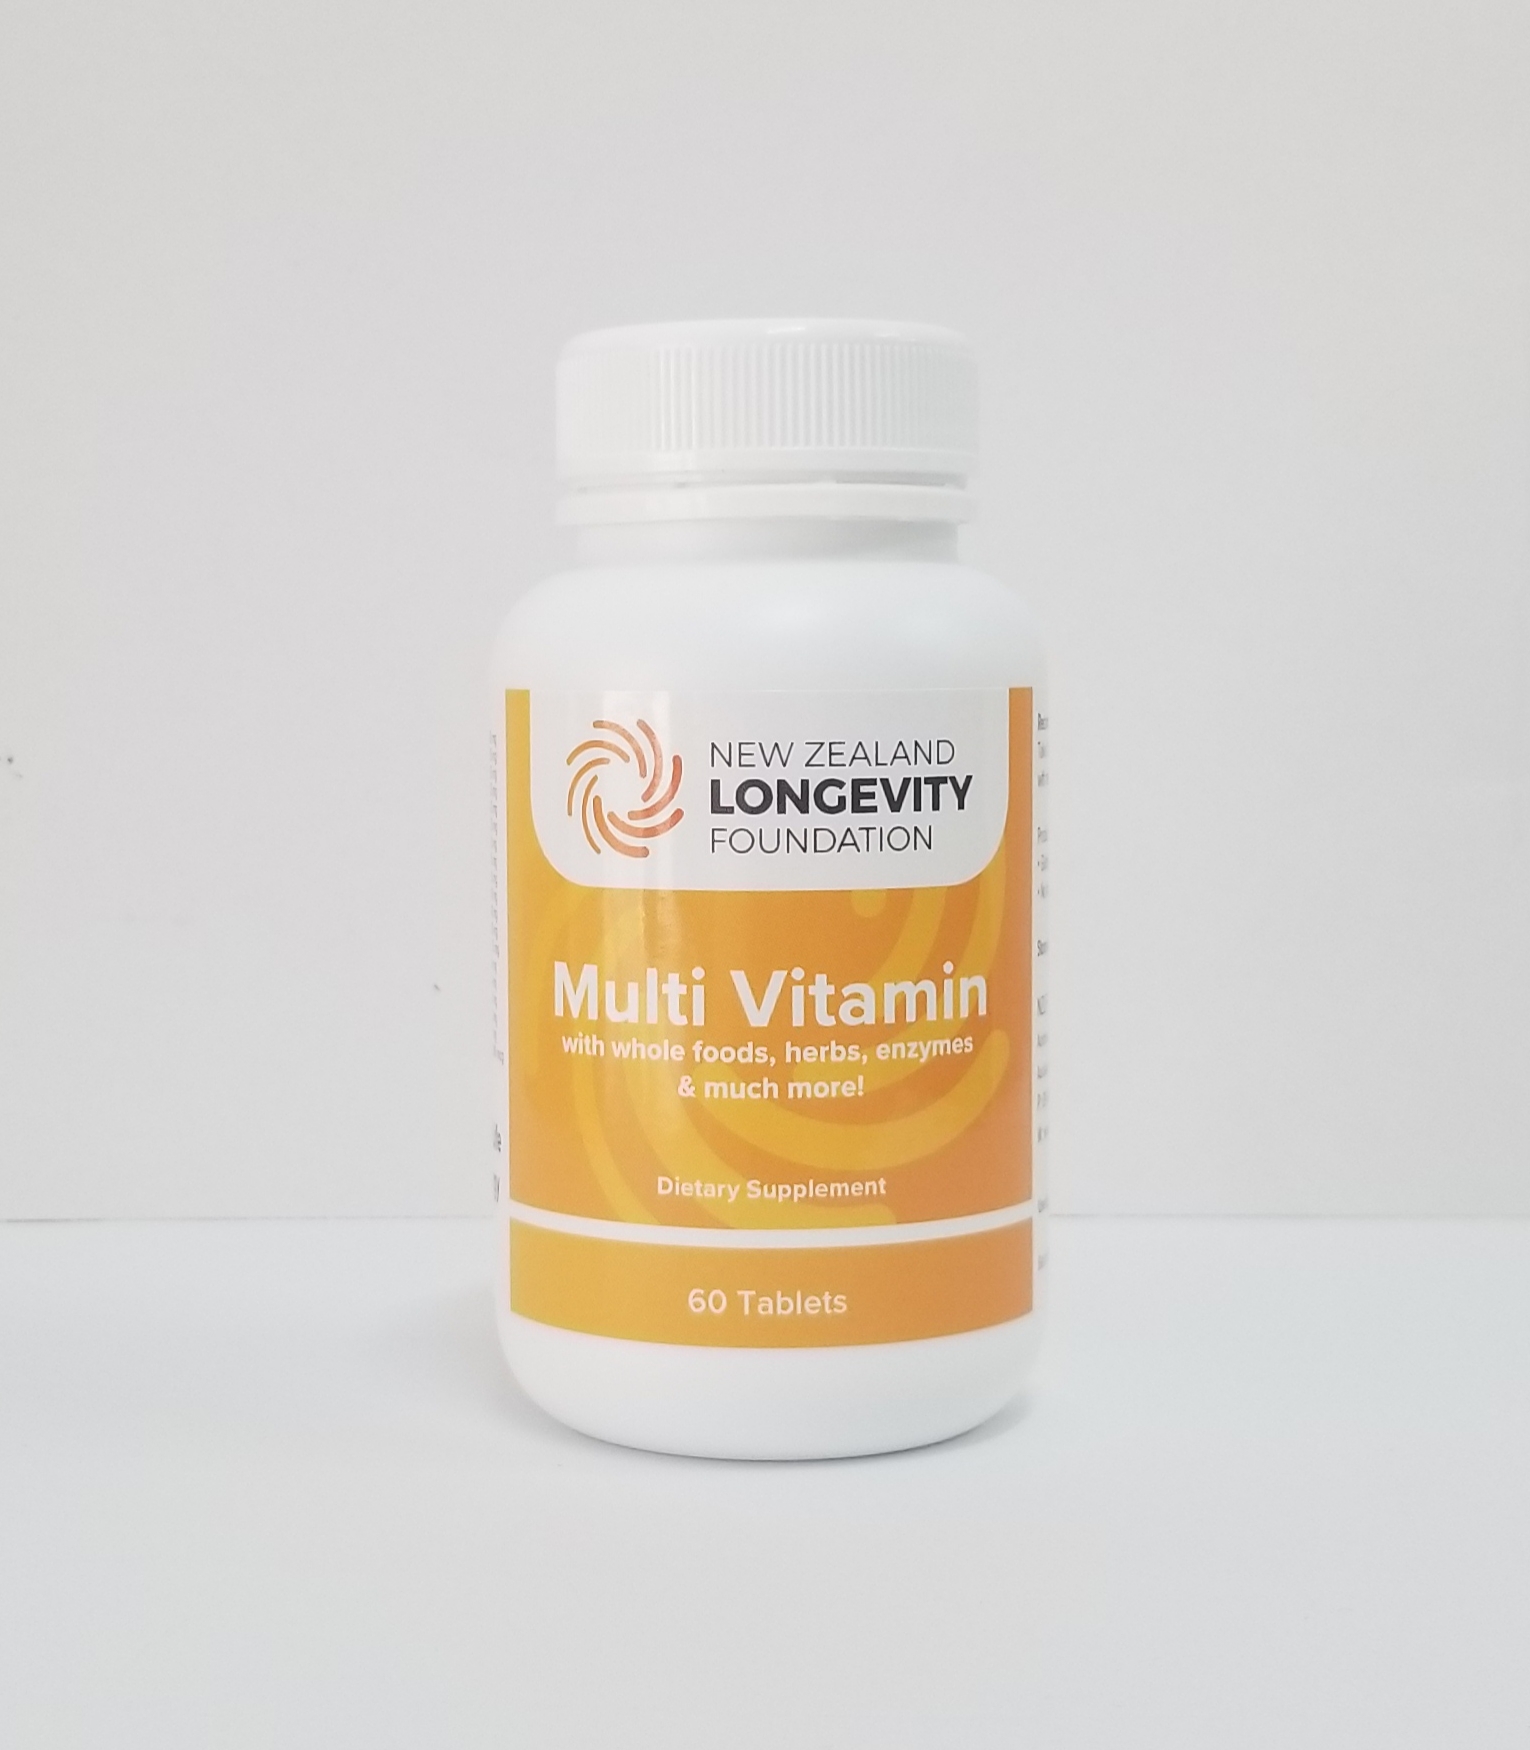 Multi Vitamin, With Whole Foods Herbs Enzymes etc. 60 Tablets, (B#1373400W)